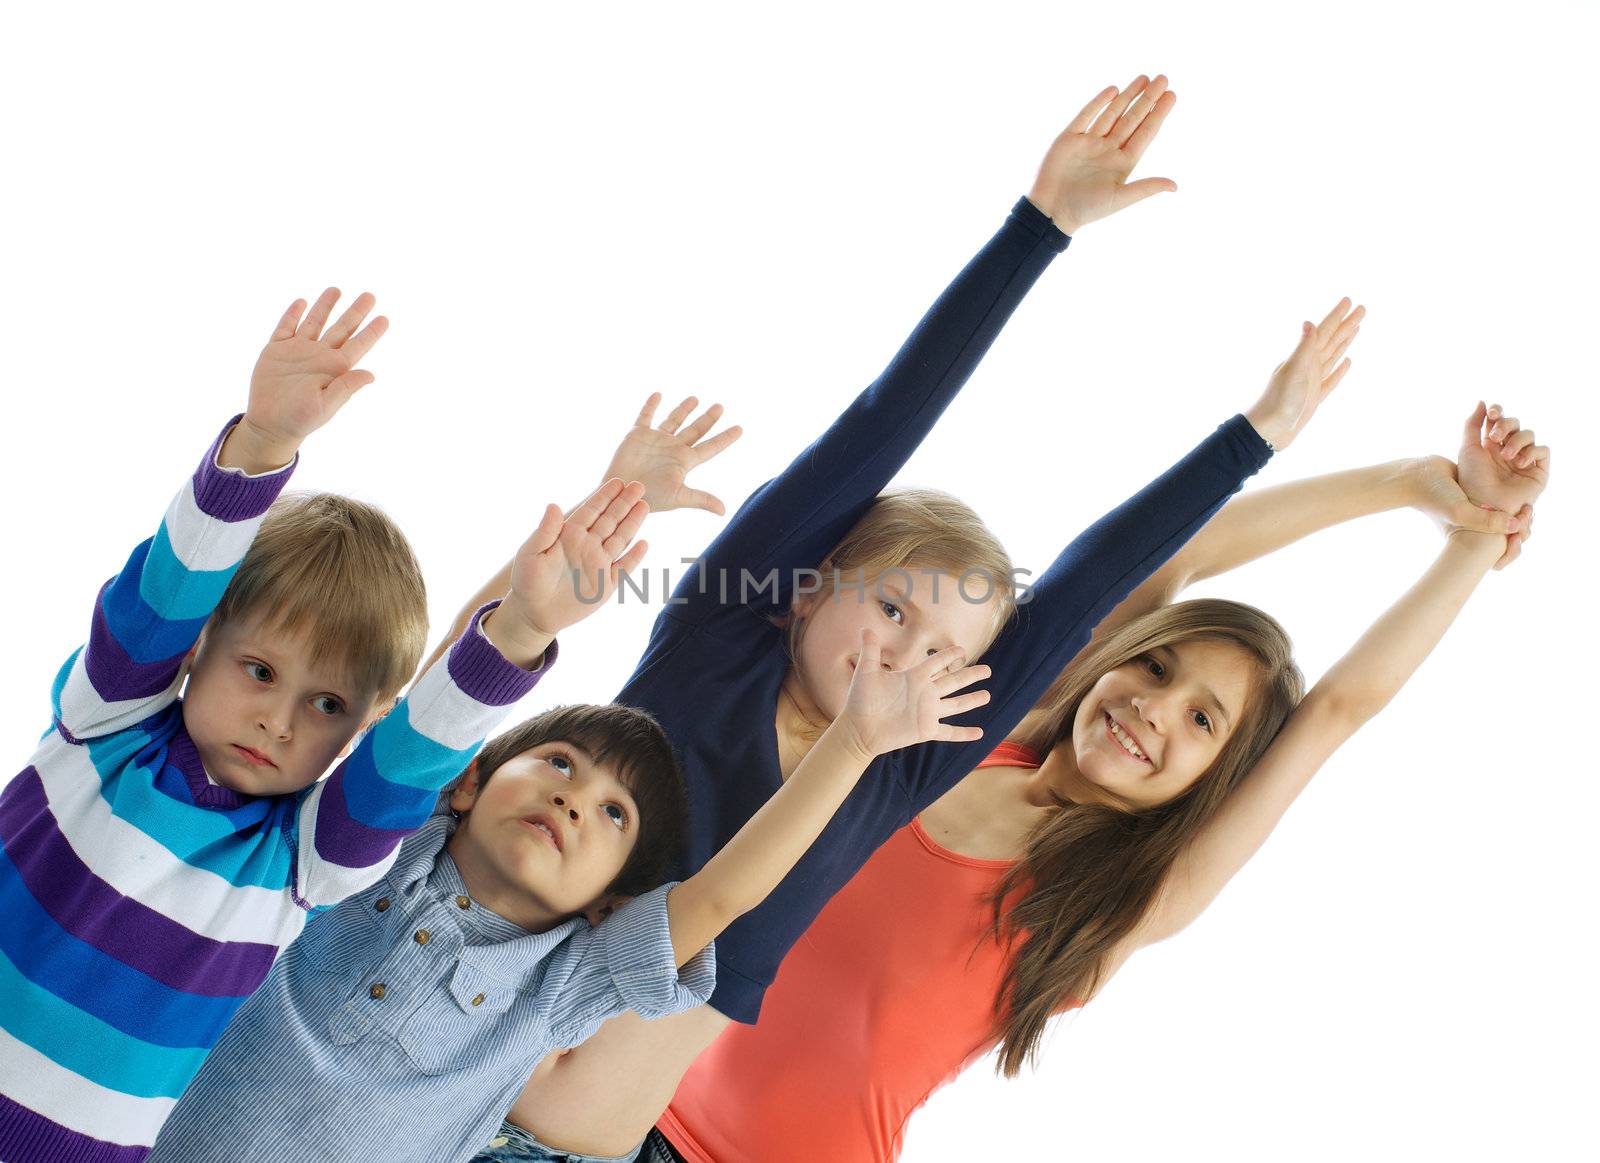 Two Boys and Two Girls with Hands Hanging Up isolated on white backgroud